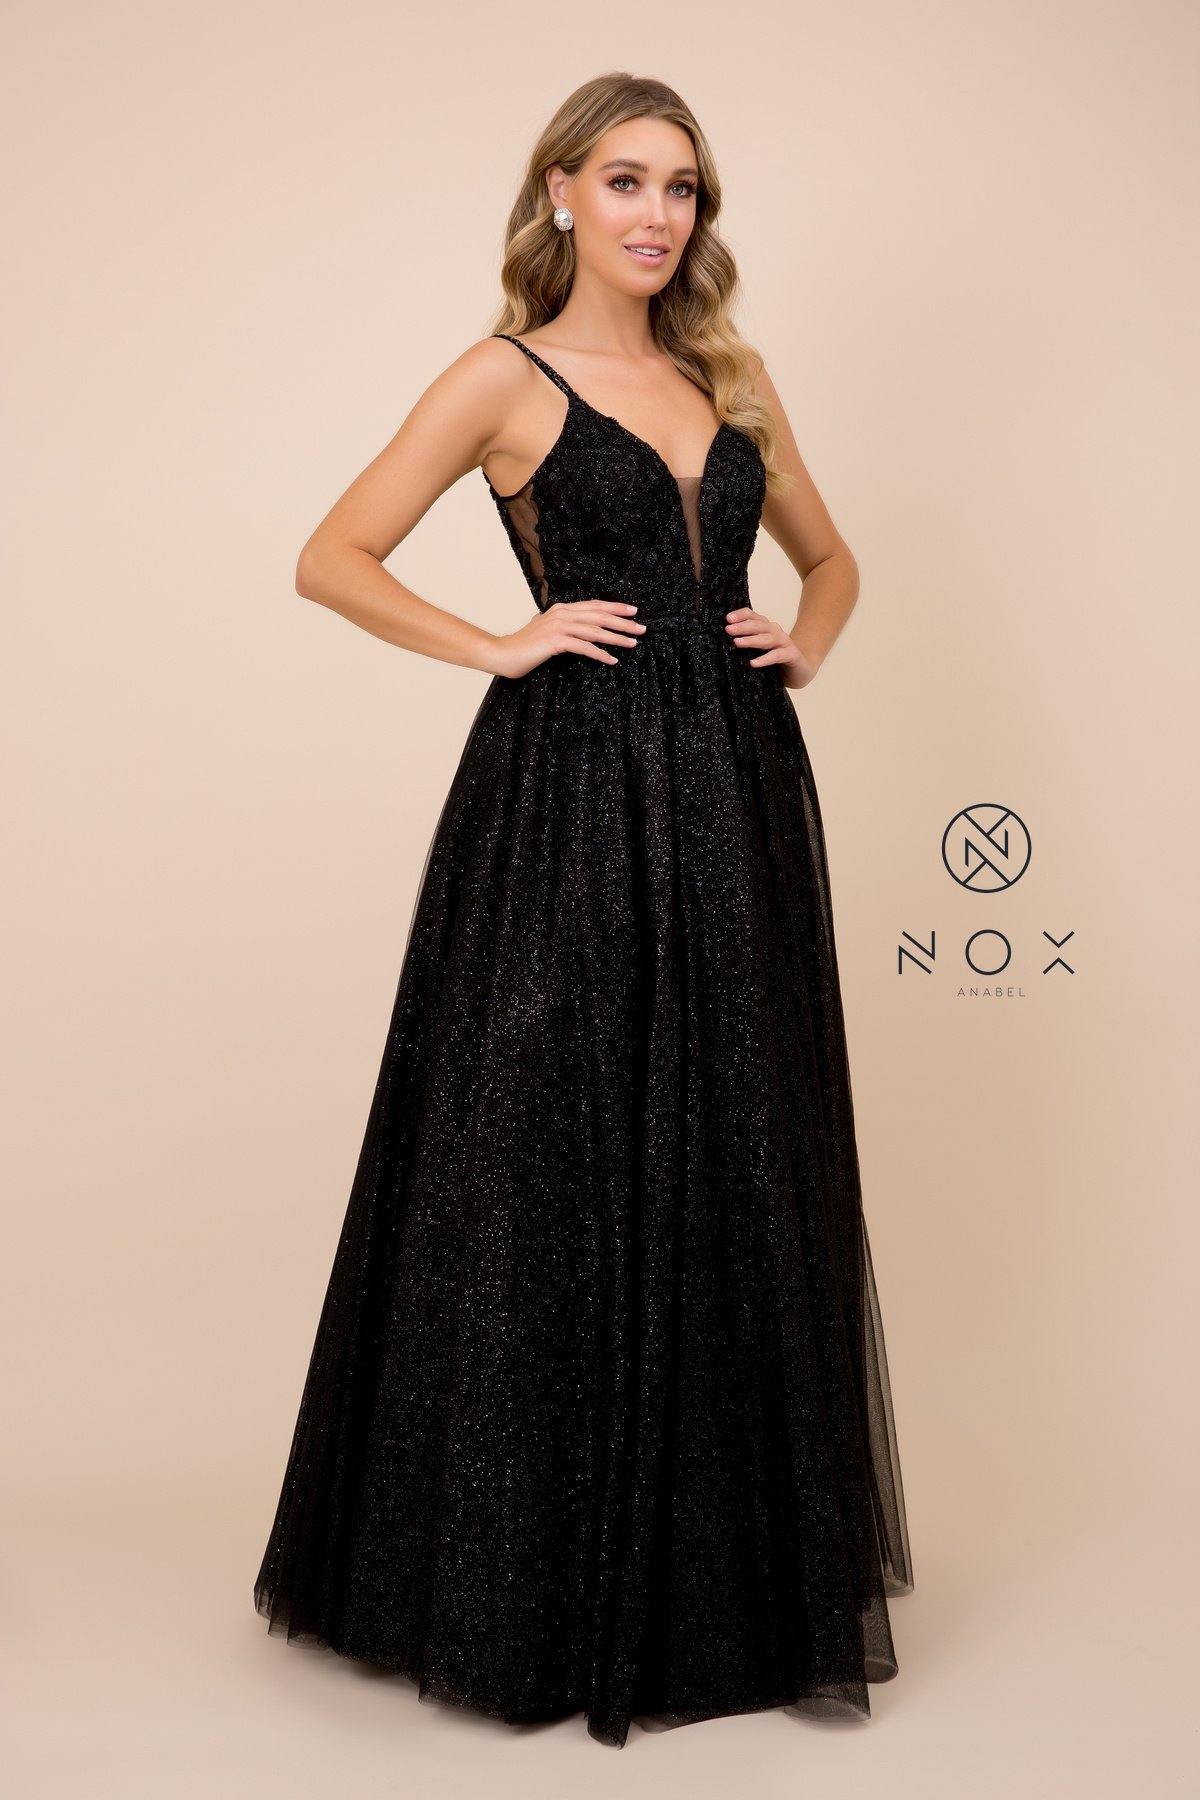 Long A-Line Glitter Prom Dress Evening Gown - The Dress Outlet Nox Anabel